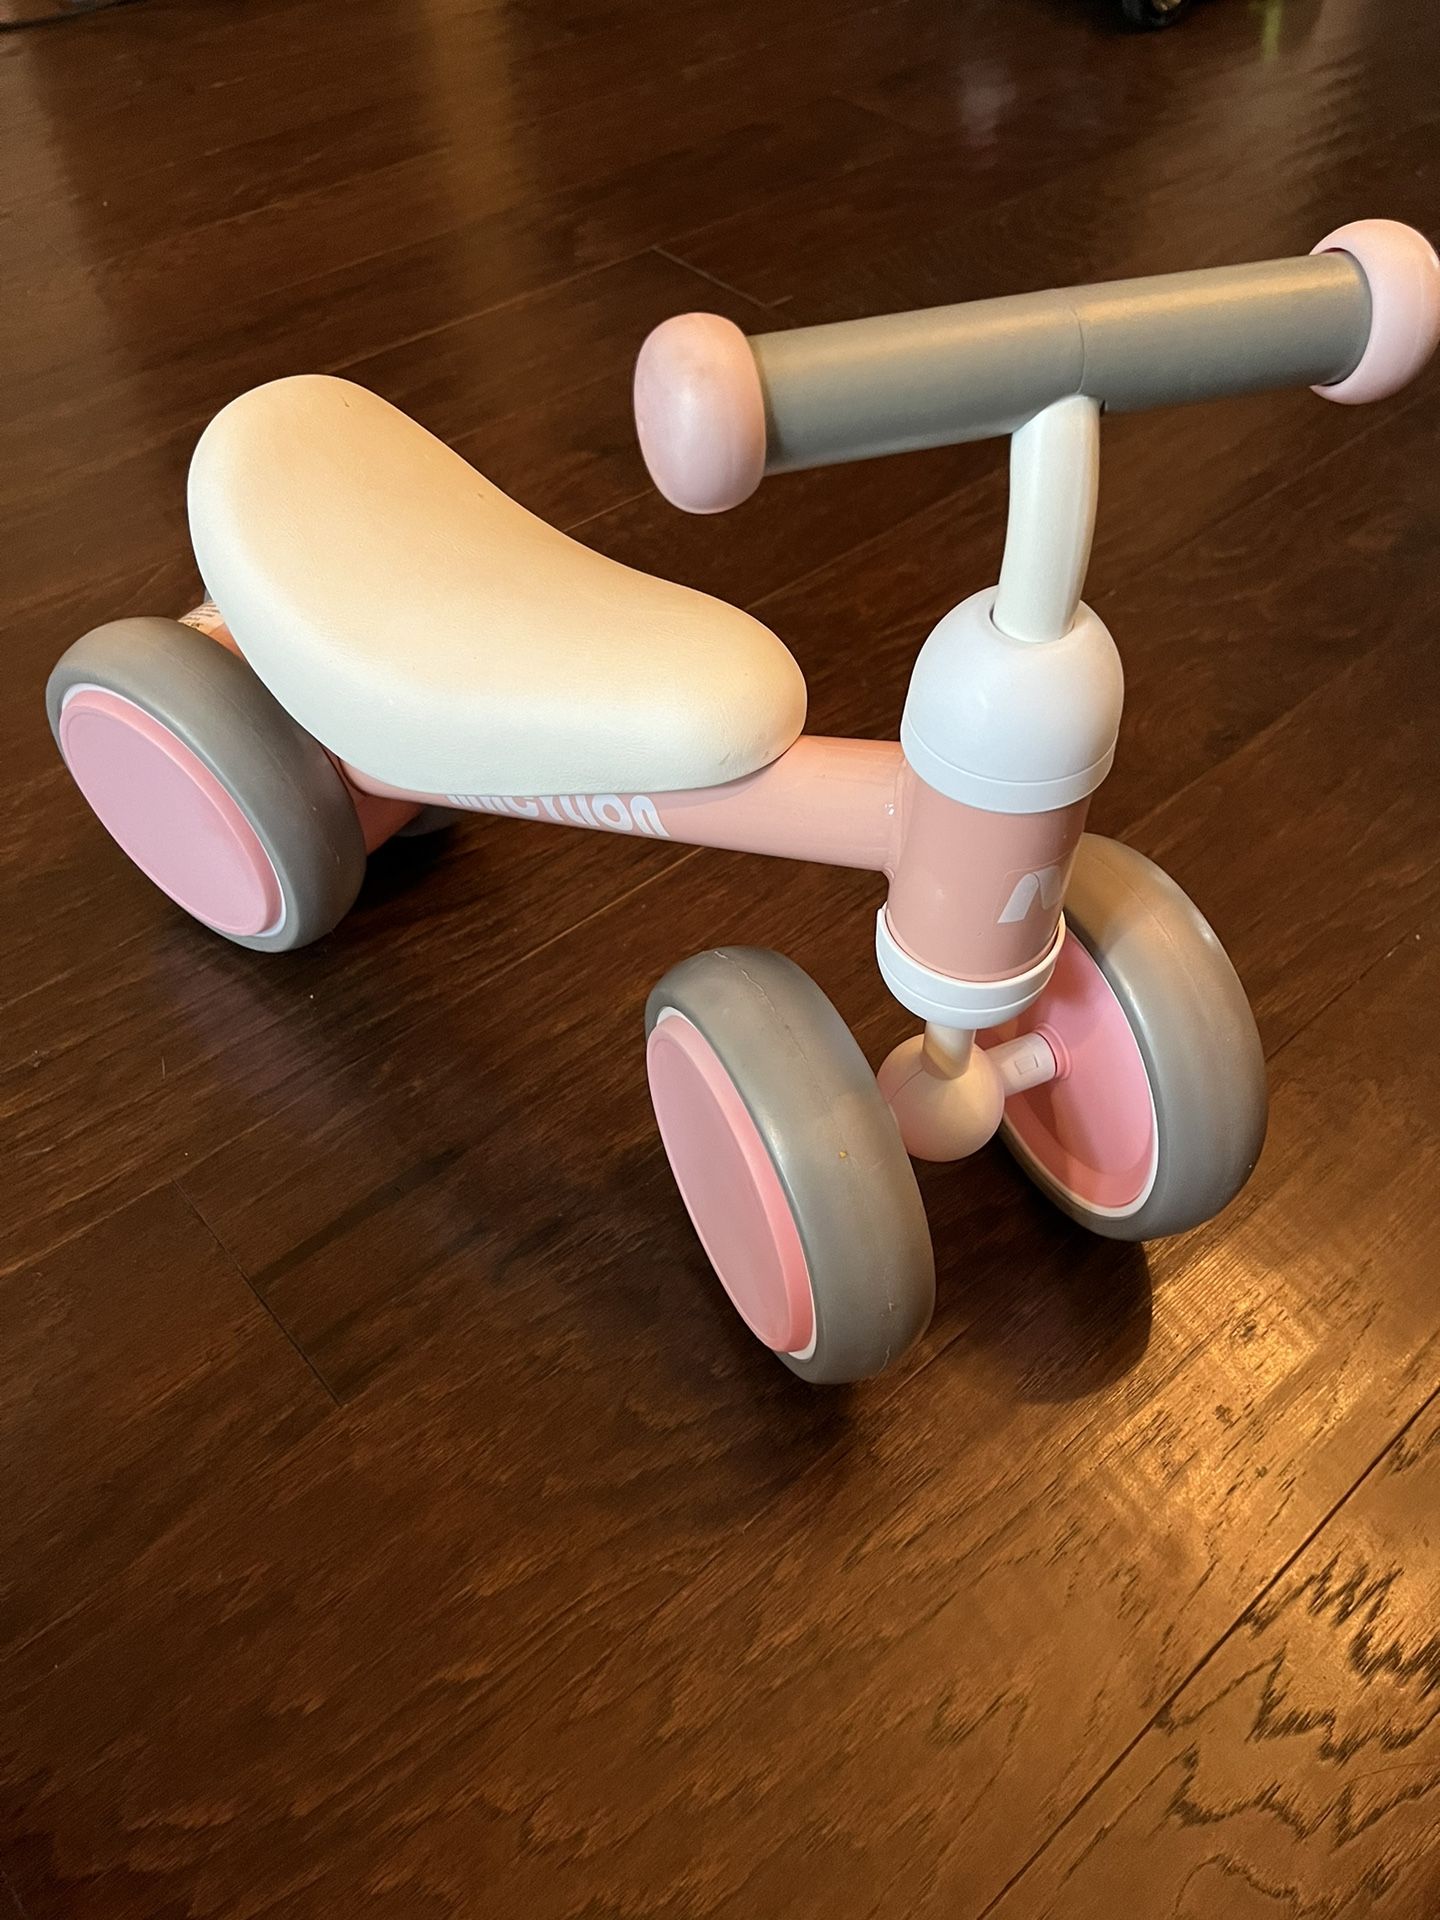 Baby Balance Bike Toys for 1 Year Old Gifts Boys Girls 10-24 Months Kids Toy Toddler Best First Birthday Gift Children Walker No Pedal Infant 4 Wheels